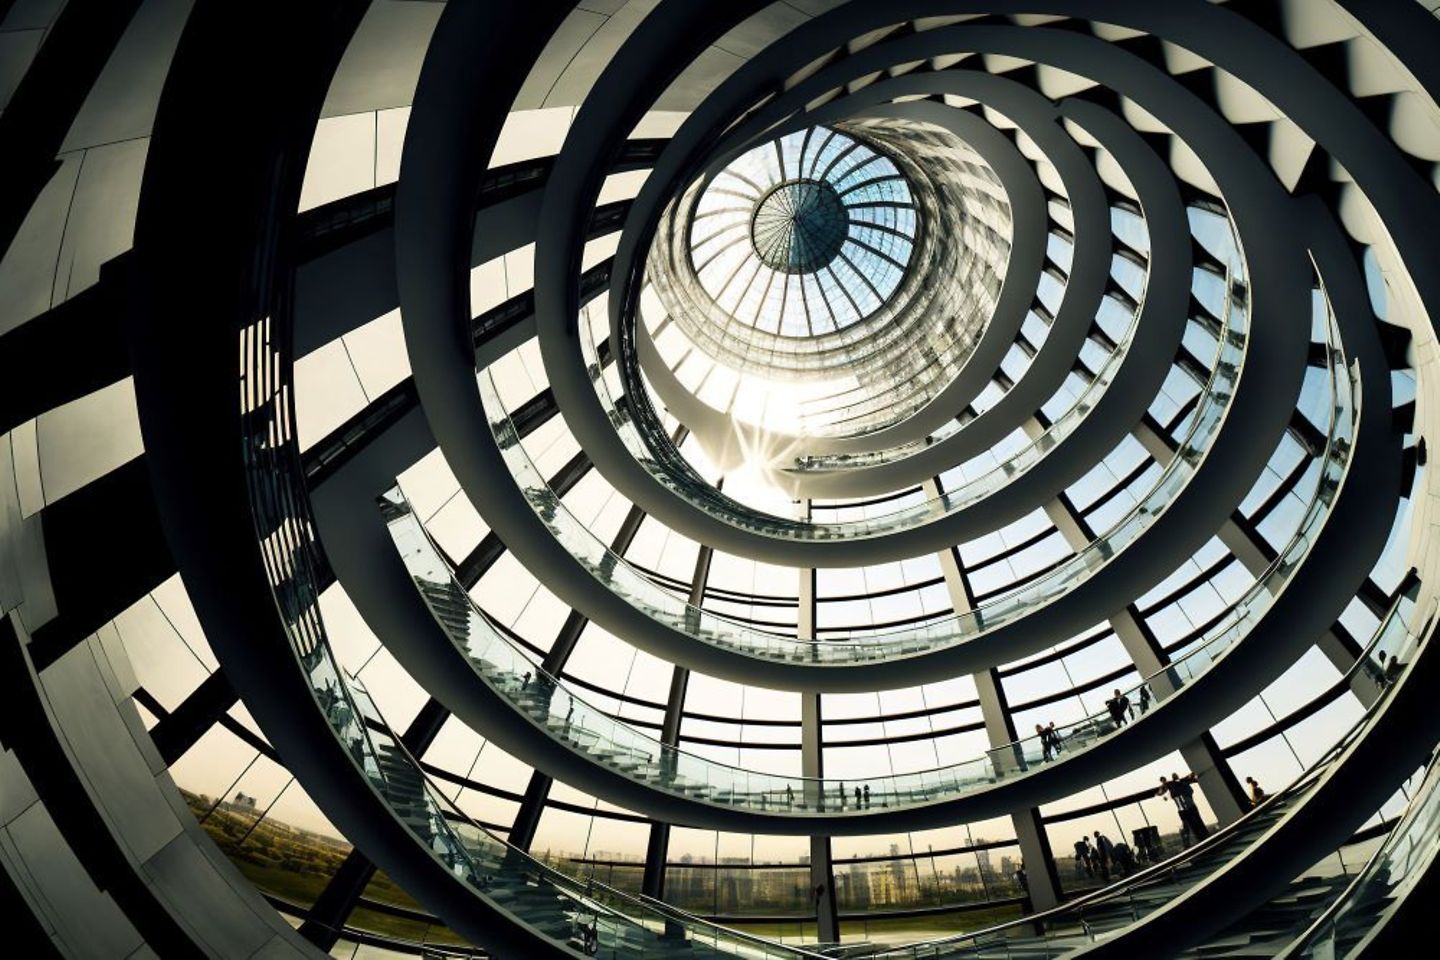 Modern spiral dome inside glass and metal building spiral stairway.